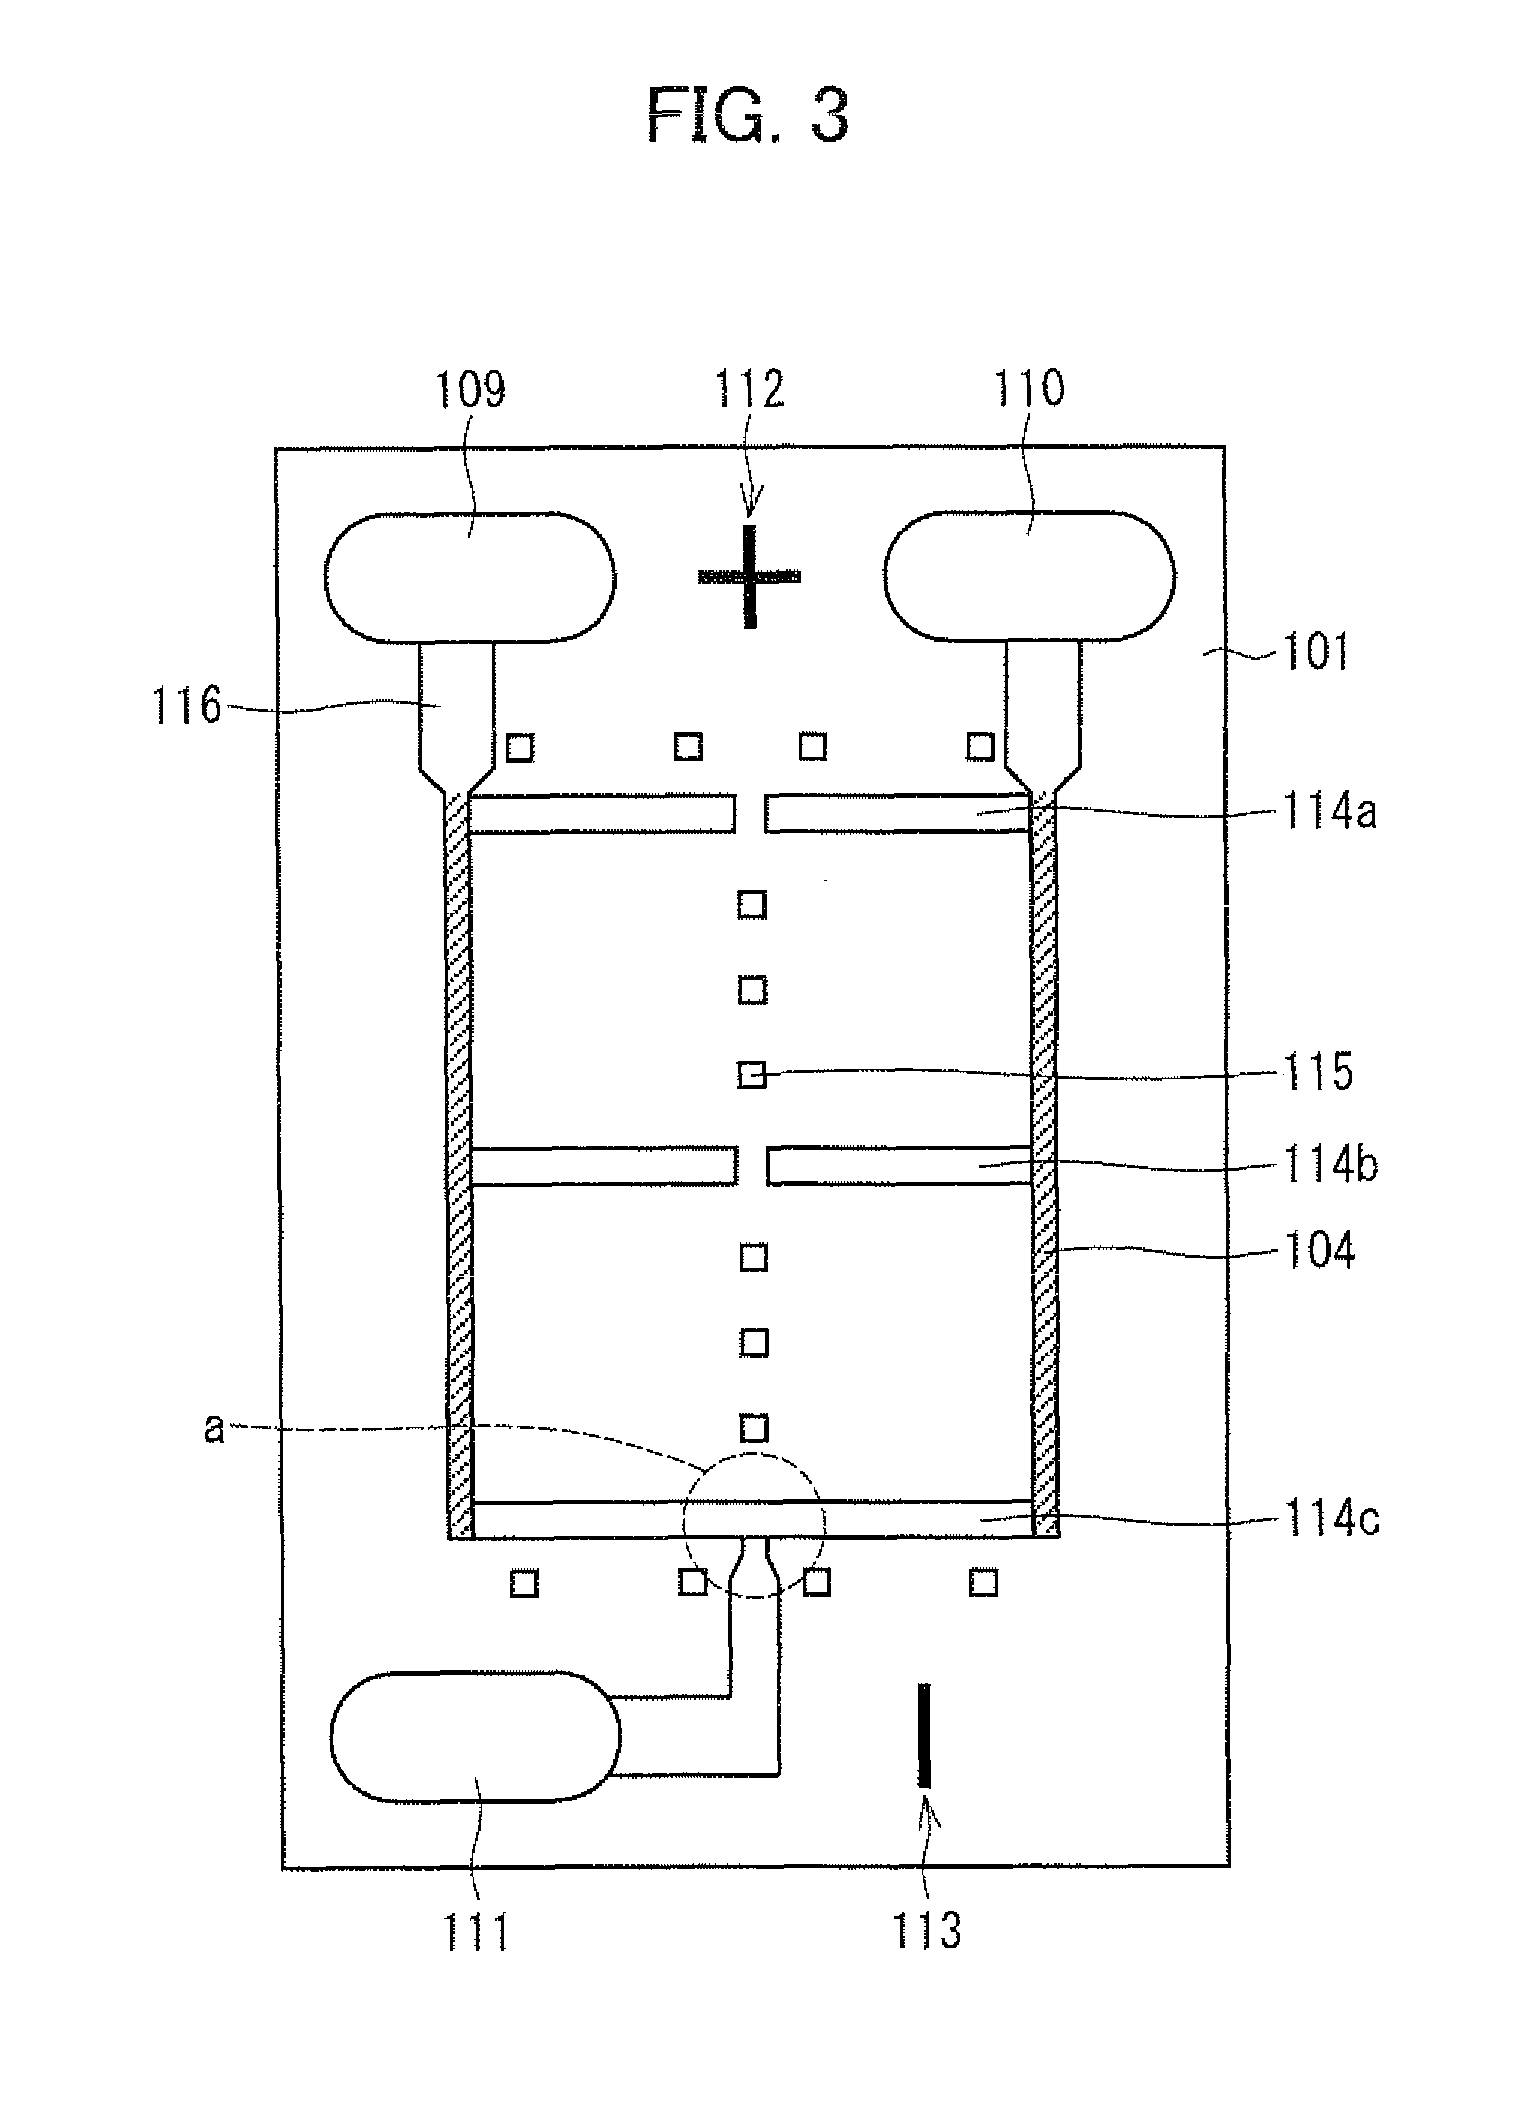 Light emitting device having plural light-emitting sections with resin walls within resin frame